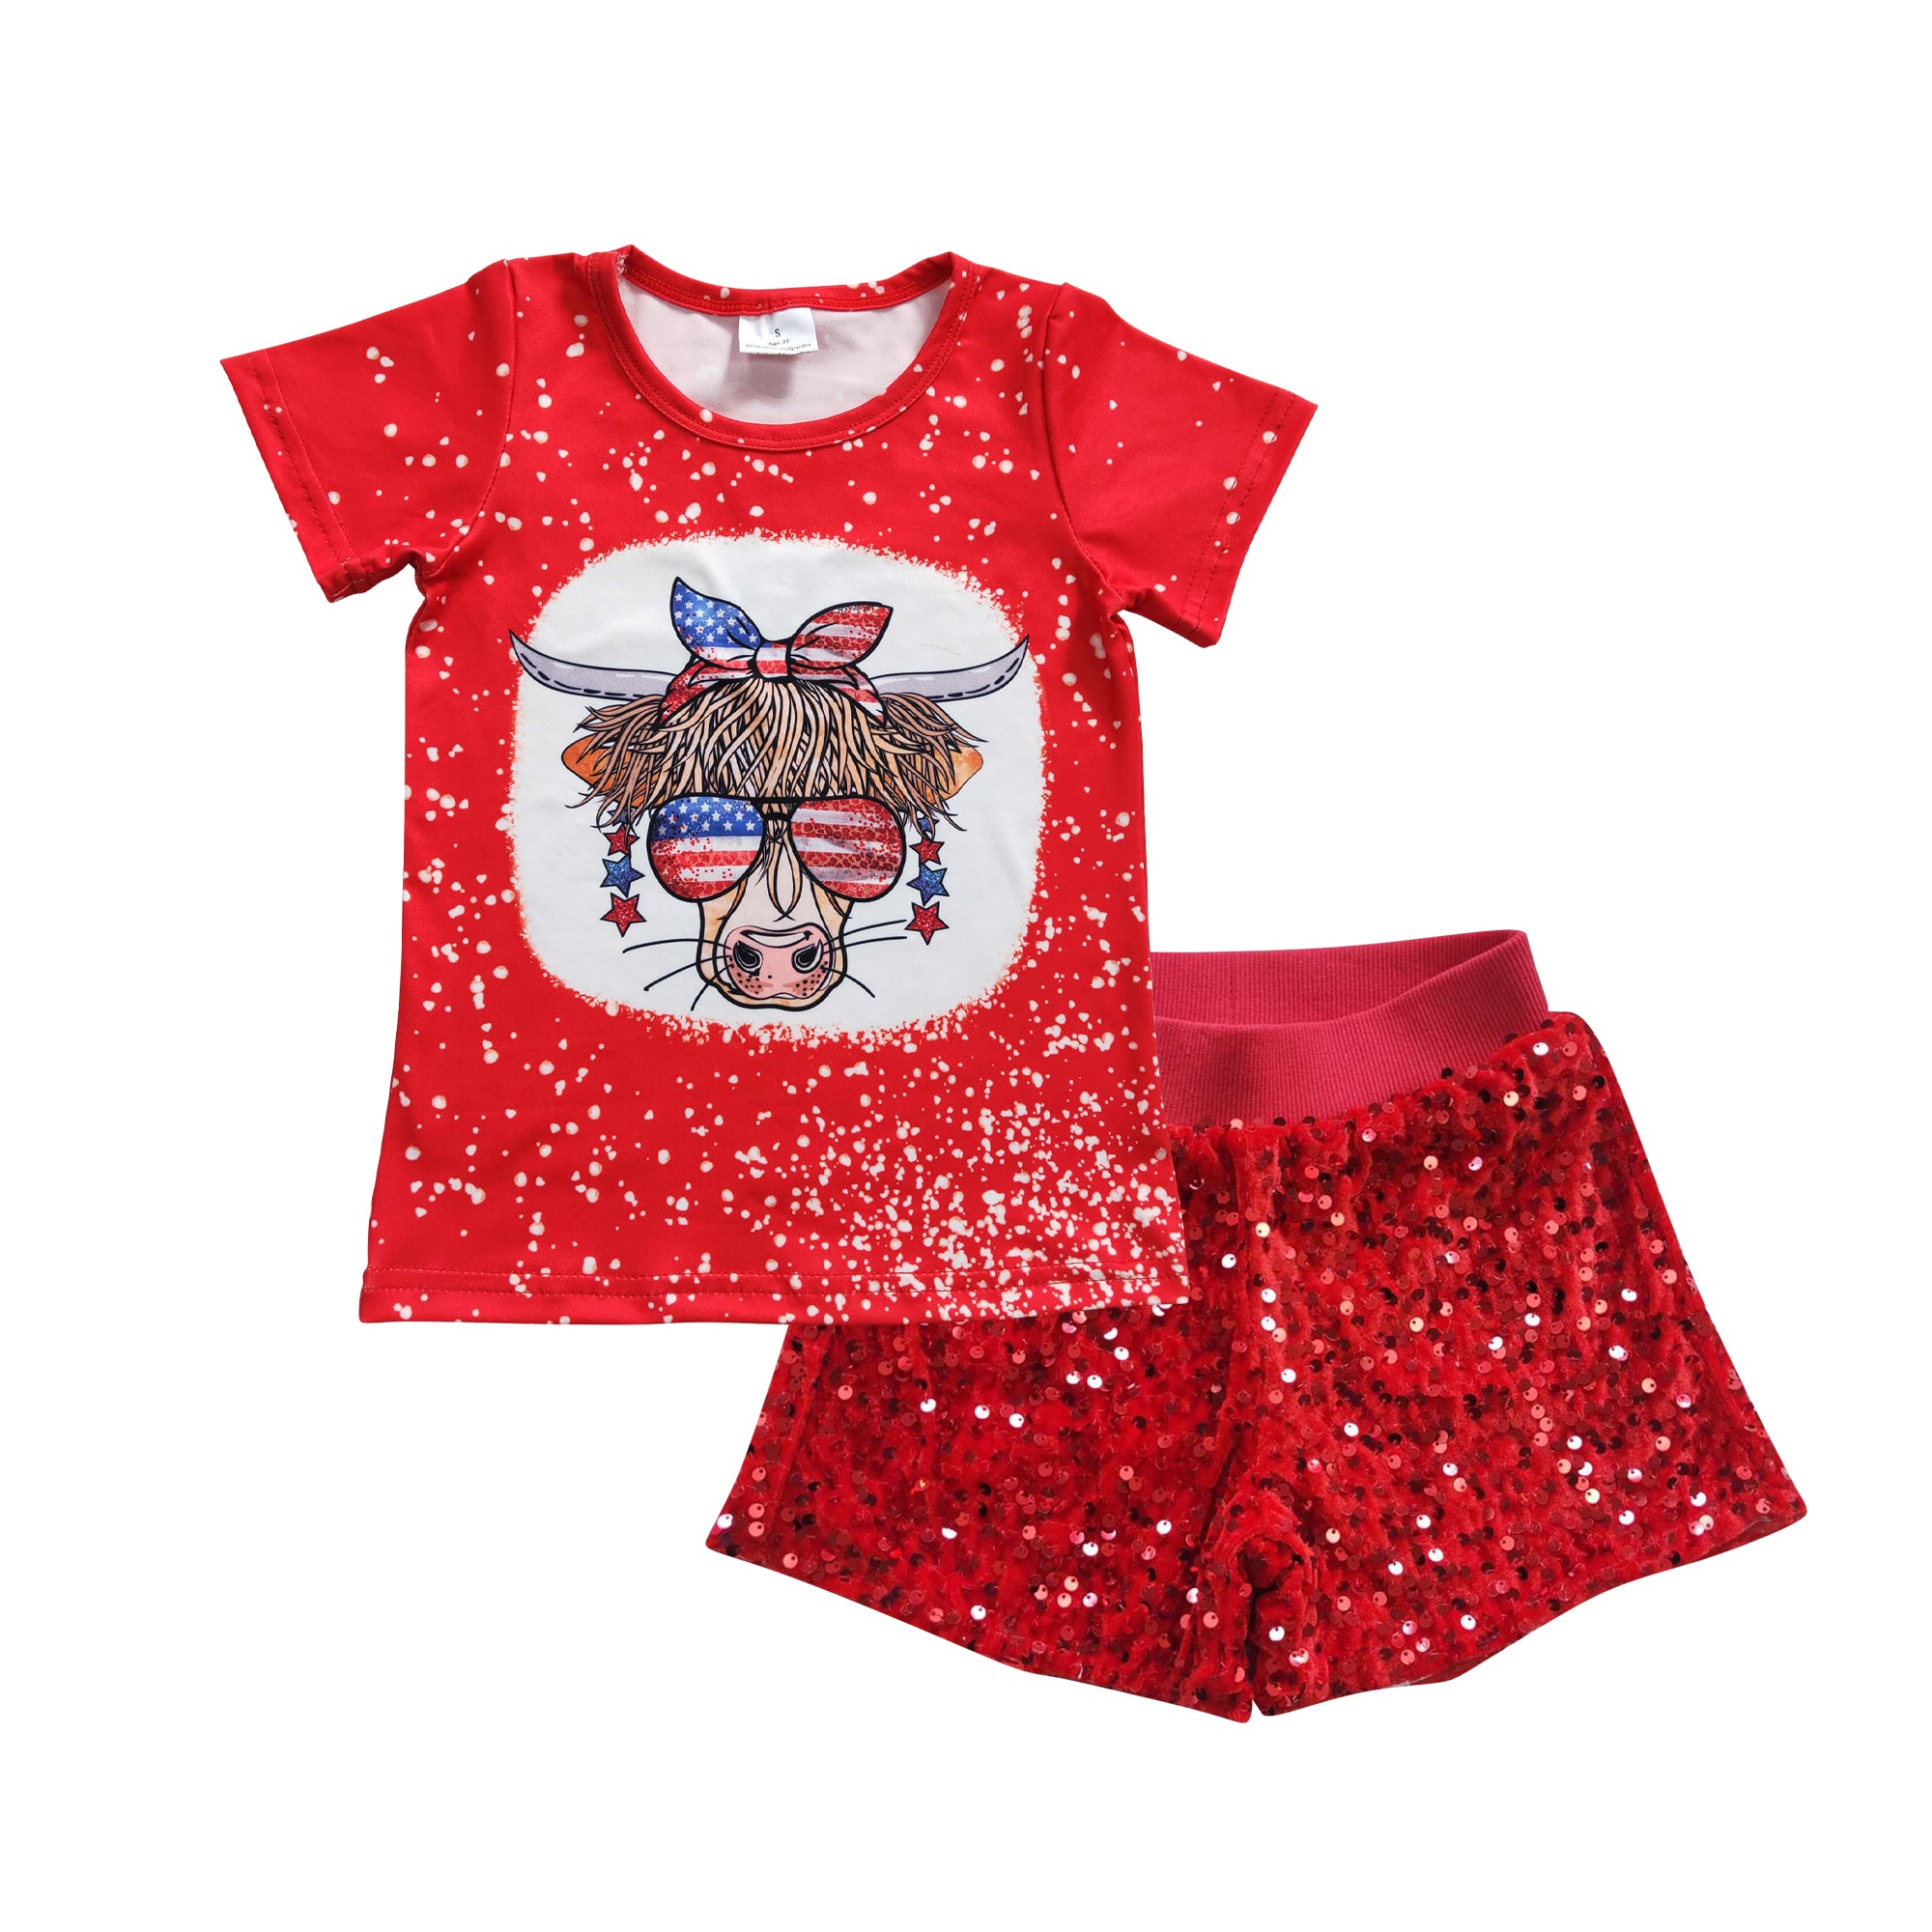 GSSO0352 toddler girl clothes patriotic 4th of July boutique girl summer shorts set